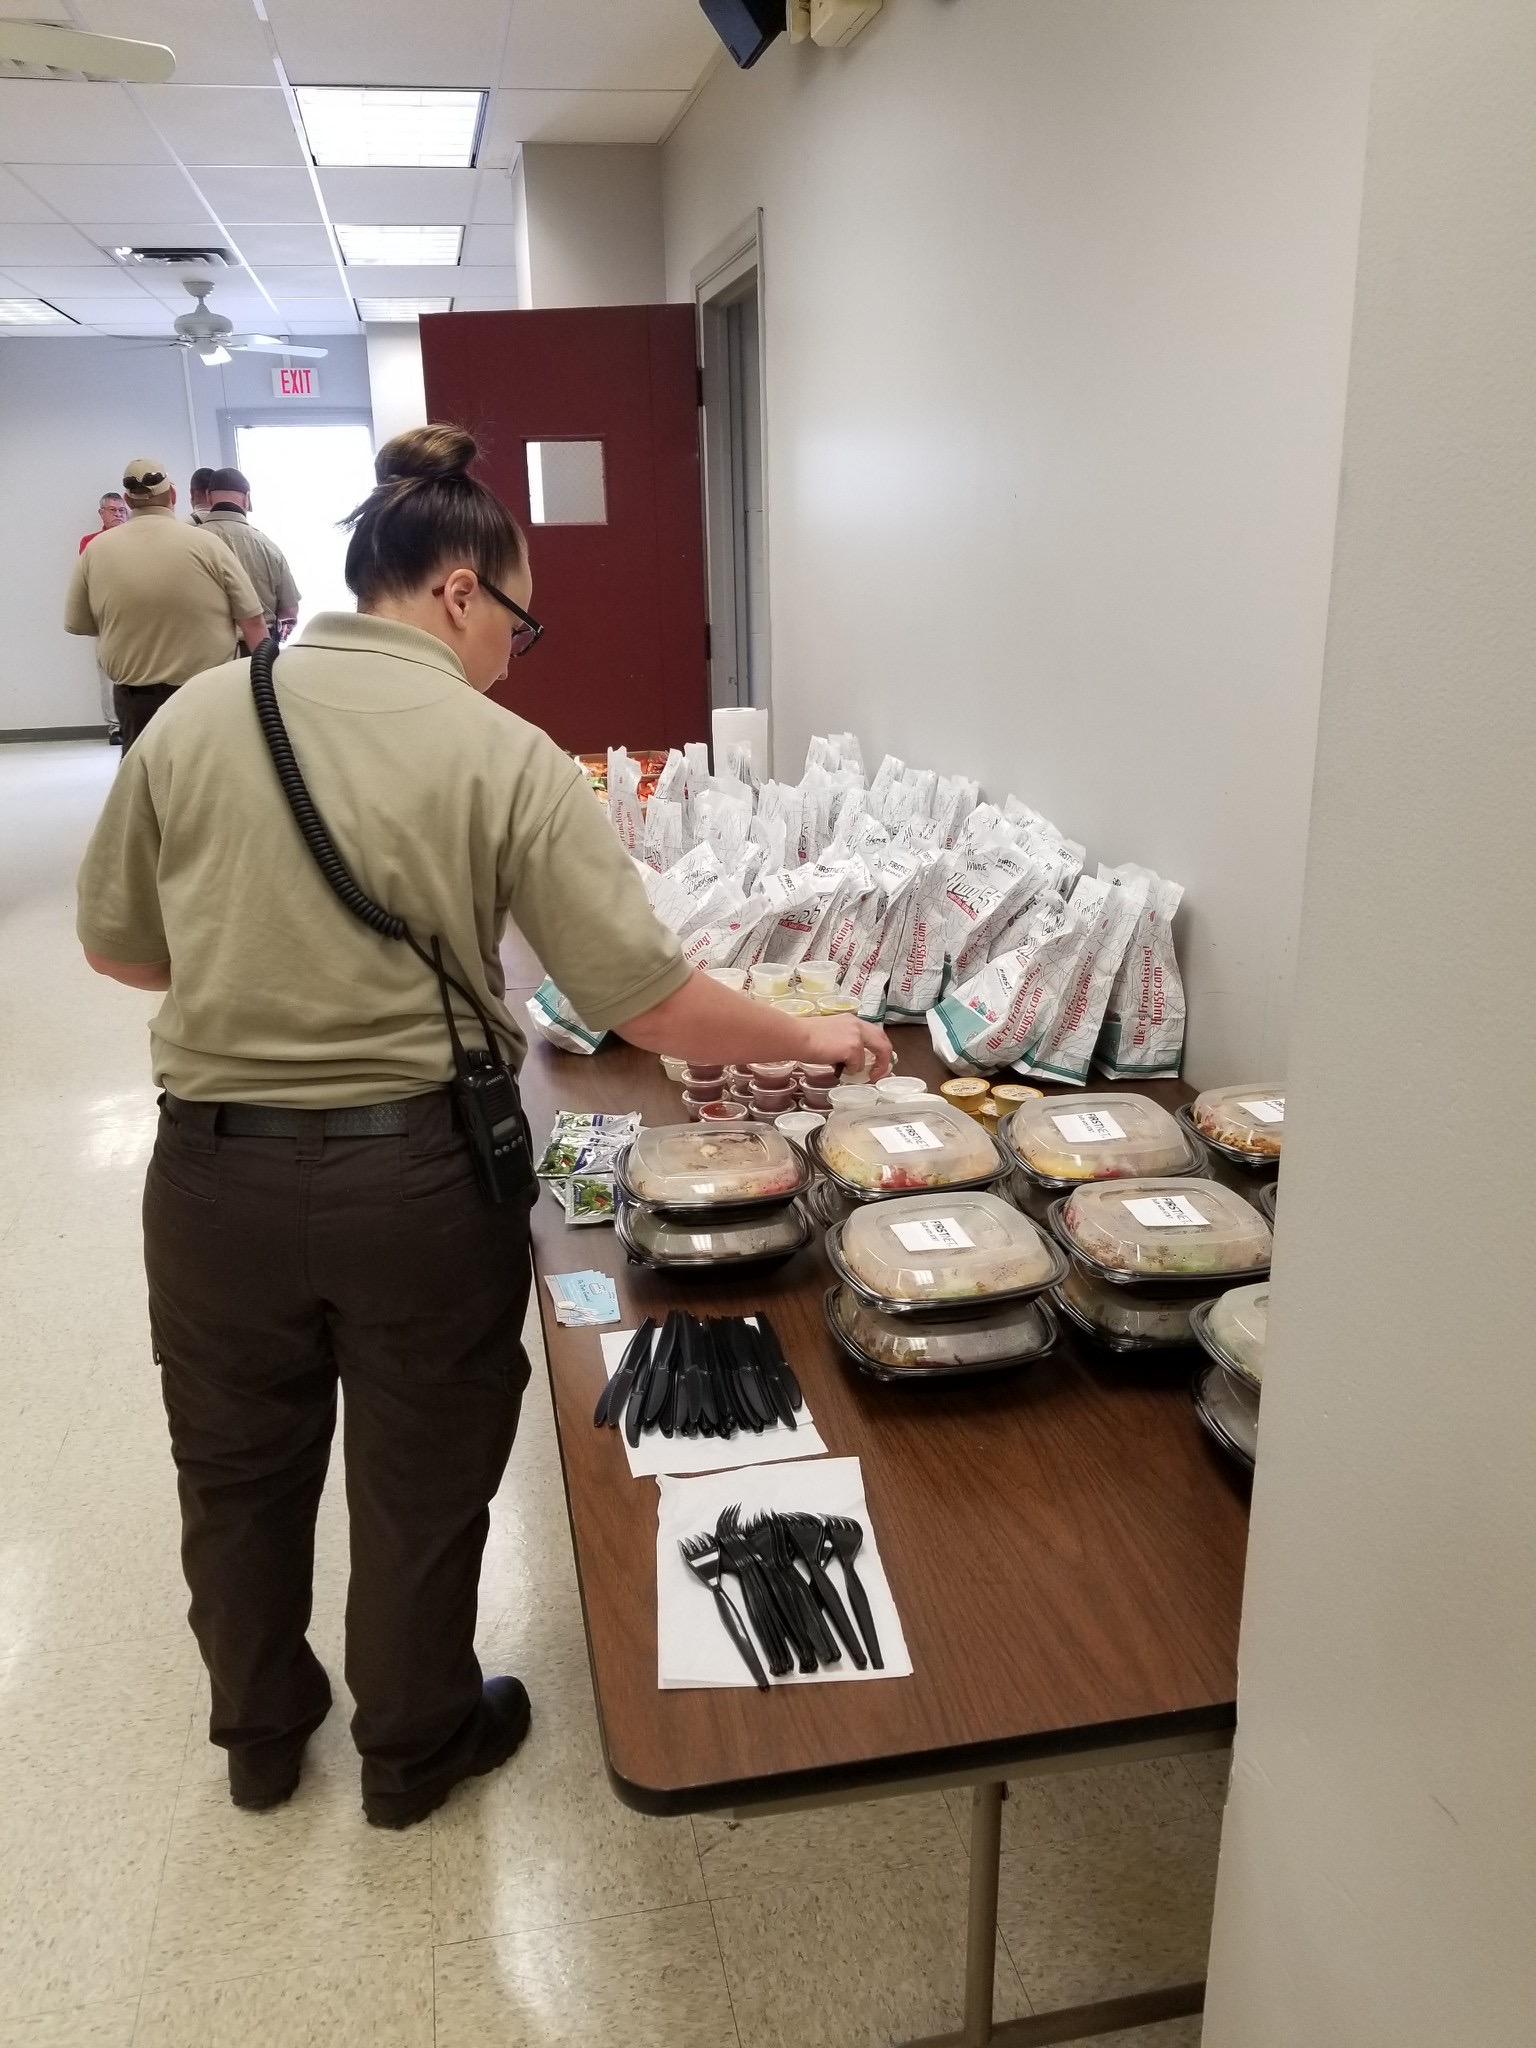 Cabell County EMS workers enjoy a boxed lunch, courtesy of AT&T and FirstNet.